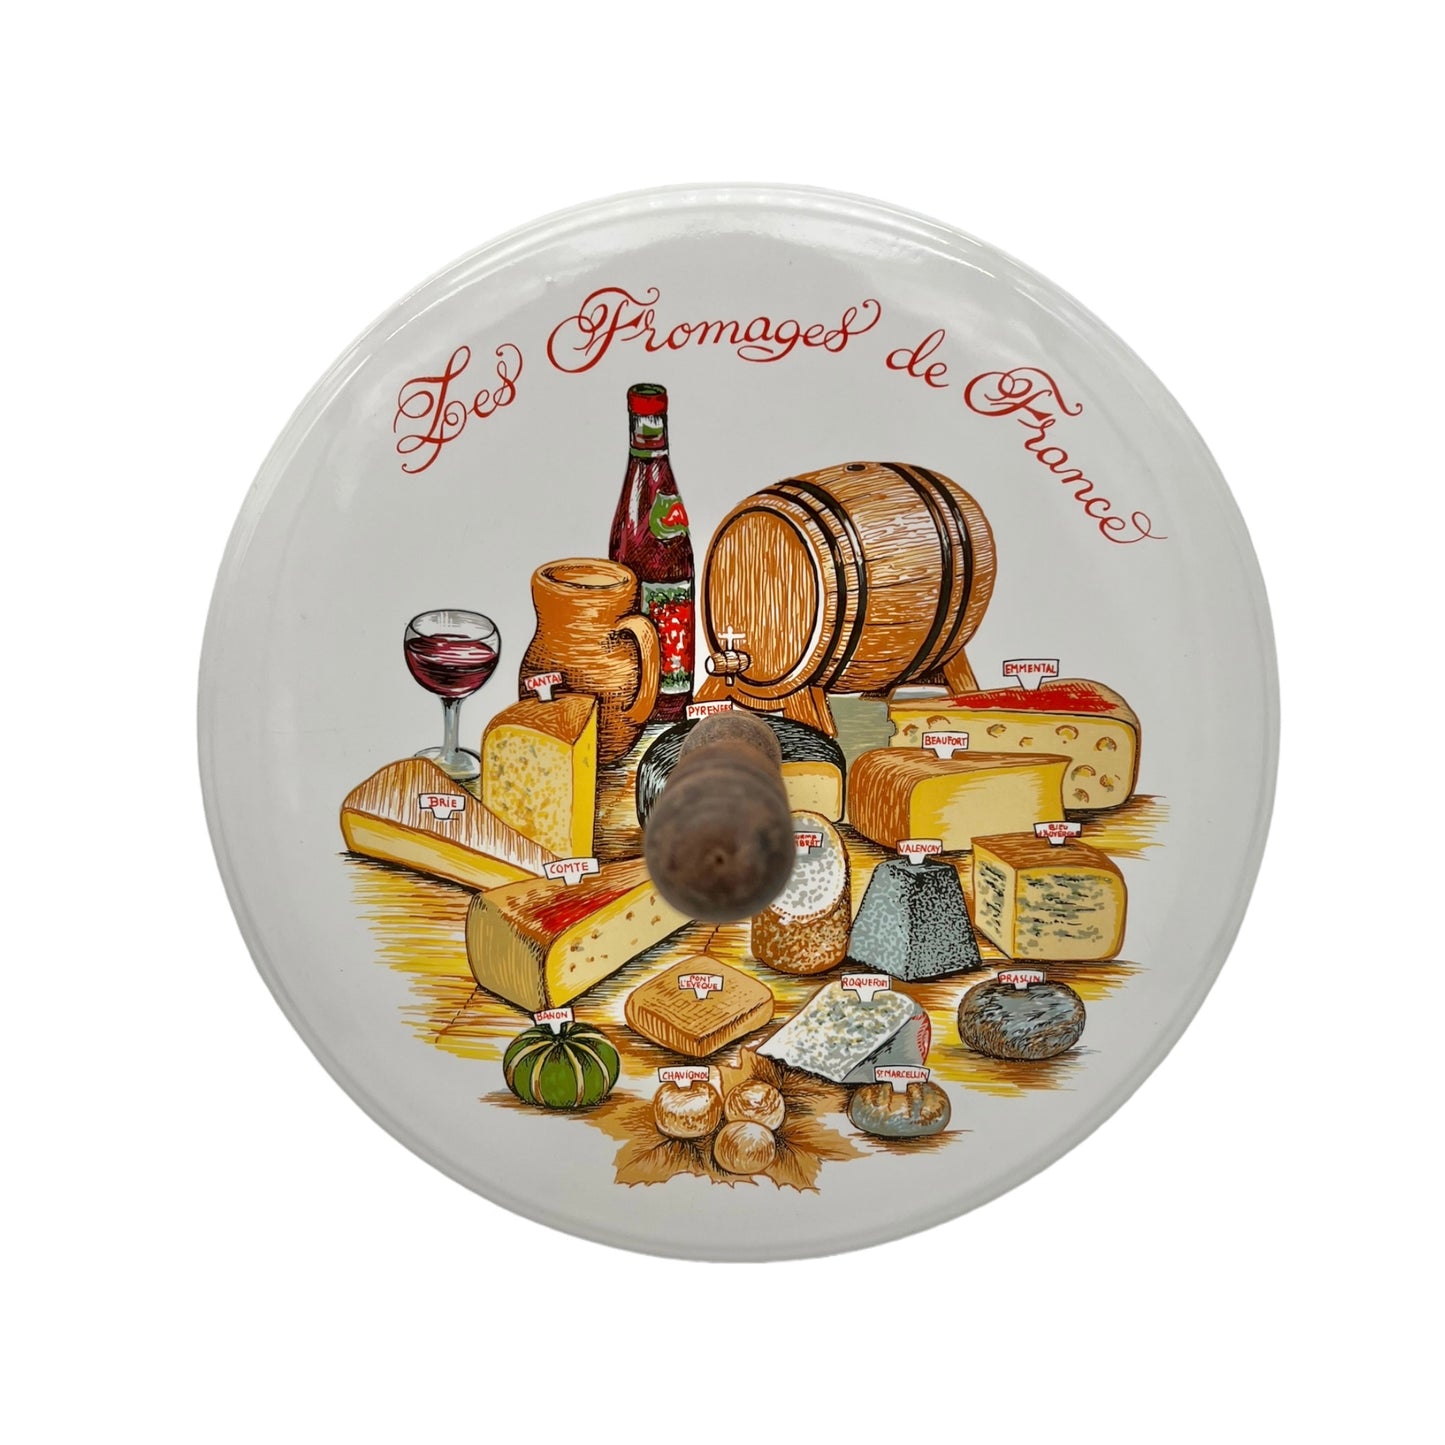 French vintage cheeseboard with a wooden handle